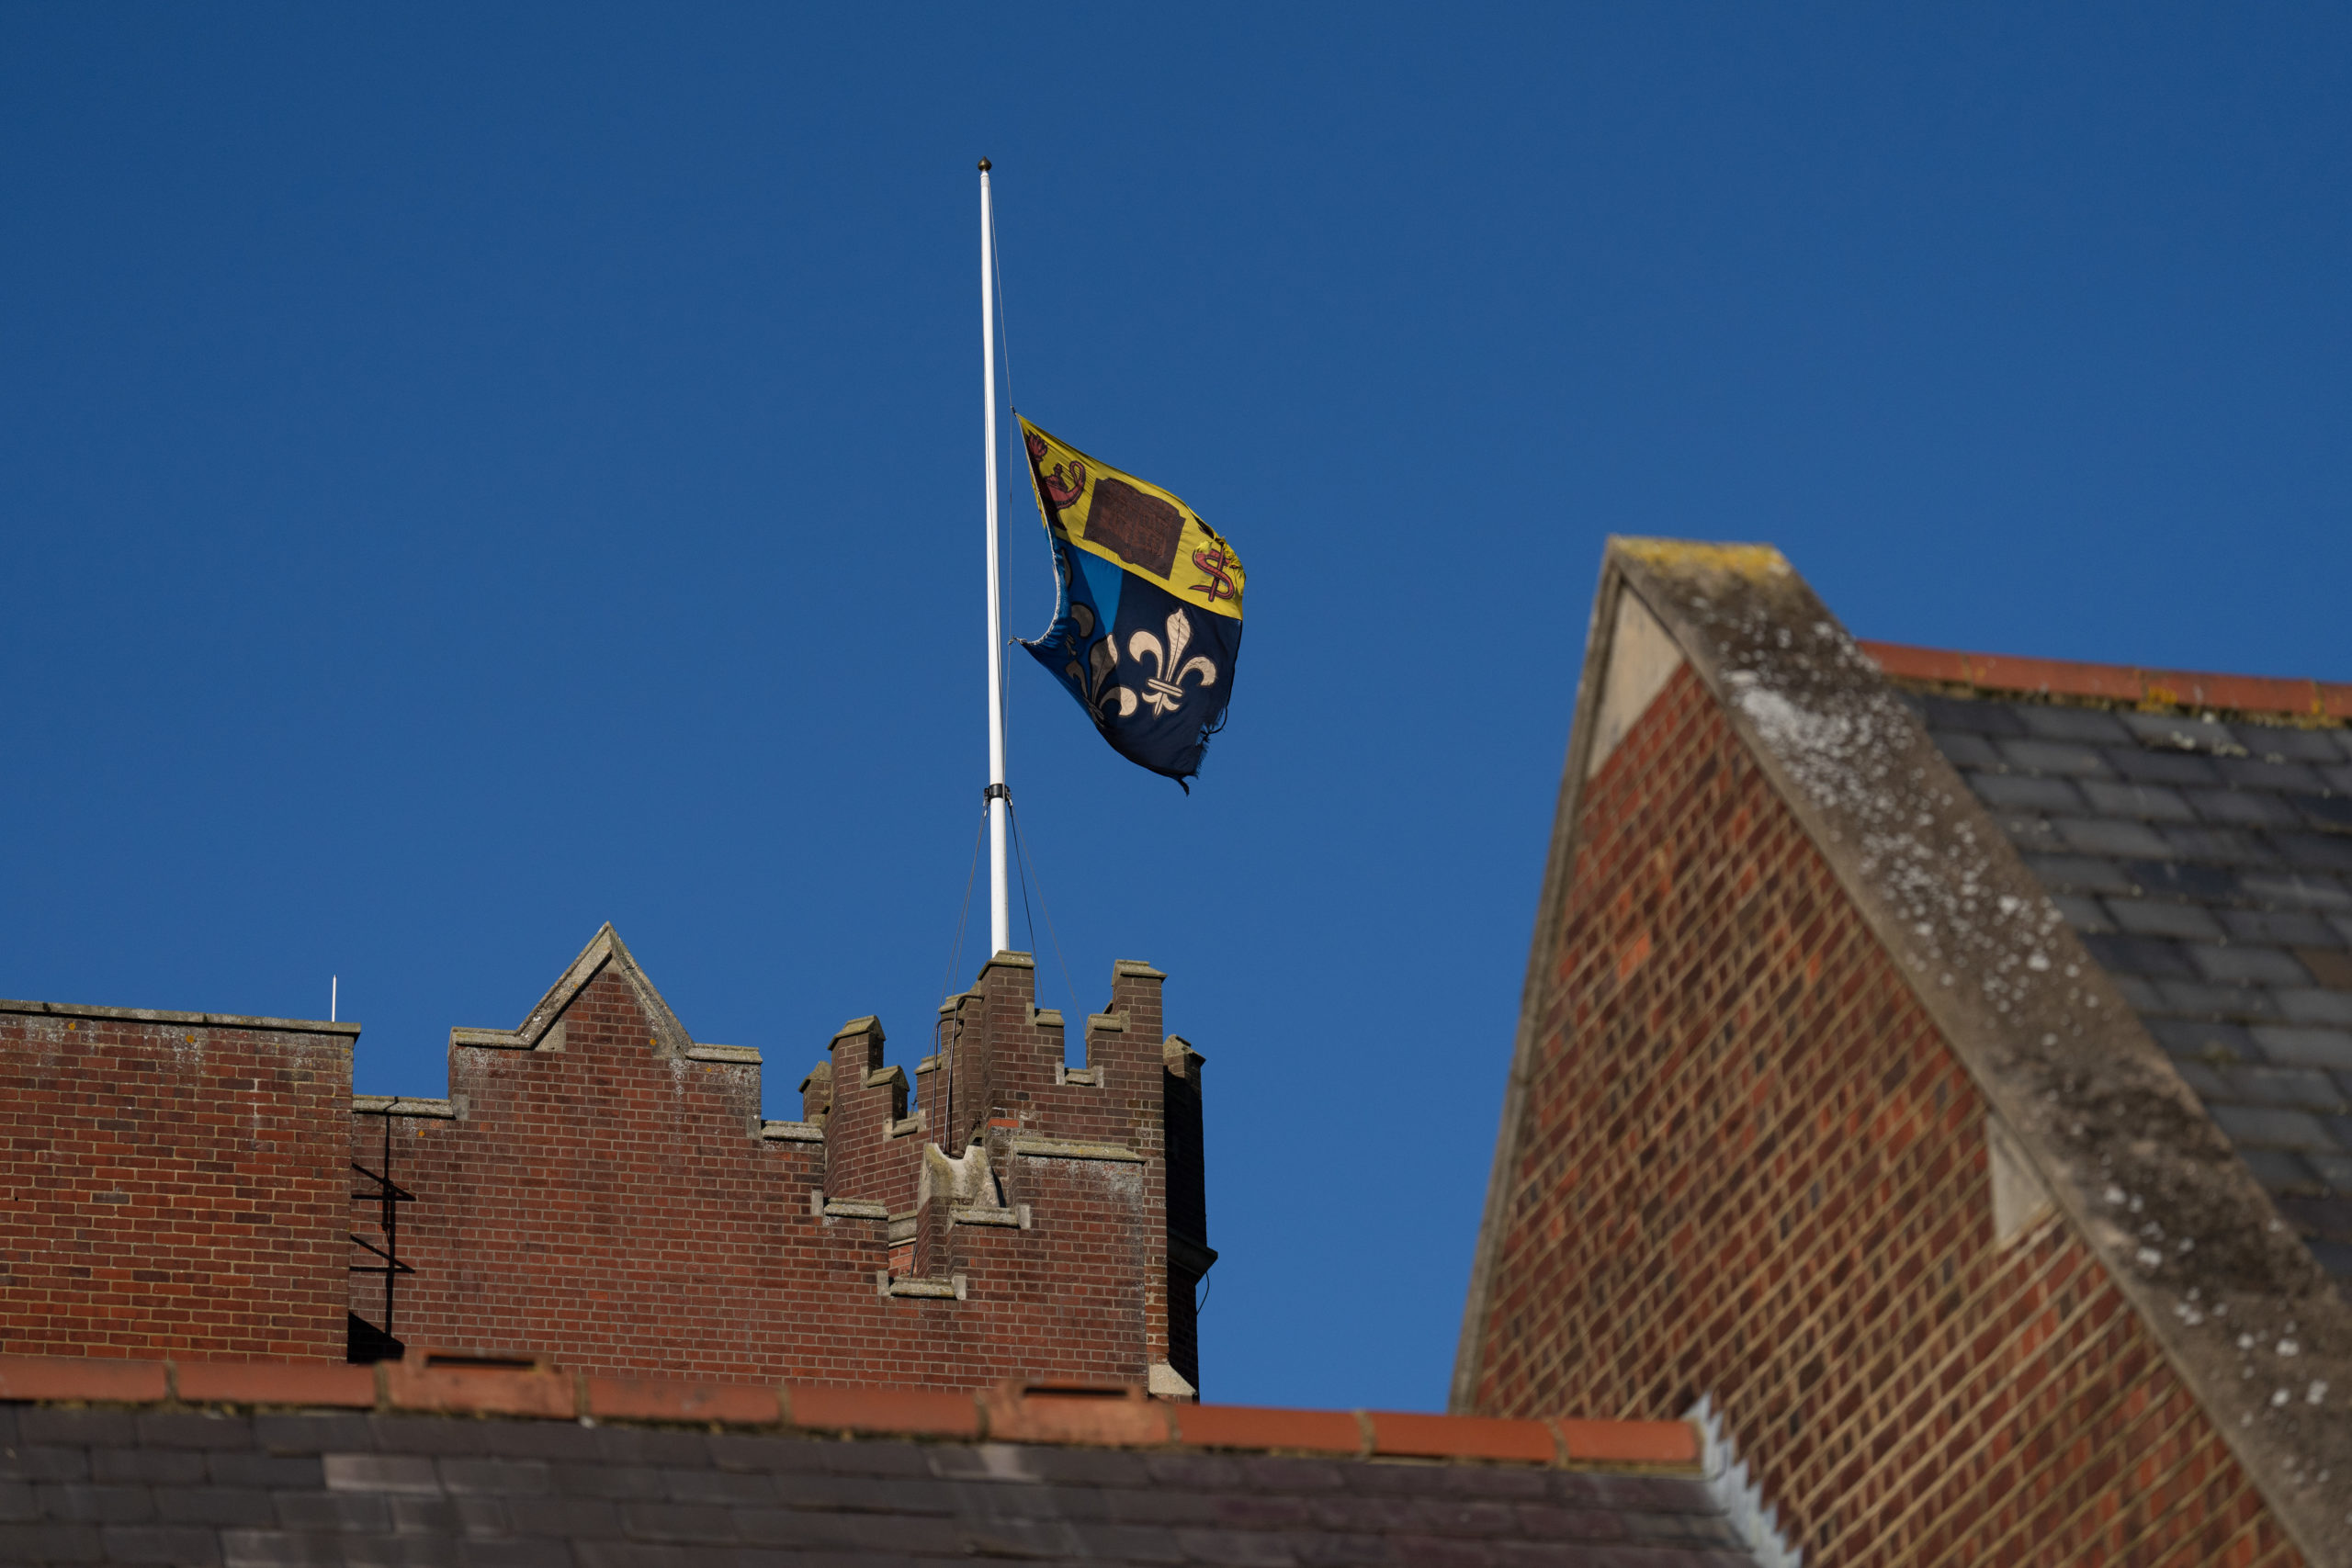 EPSOM, ENGLAND - FEBRUARY 06: A flag flies at half mast at Epsom College after the school's head, Emma Pattison, was found dead alongside her family yesterday, on February 6, 2023 in Epsom, England. Pattison, her husband George, and 7-year-old daughter Emma were found dead in a property on school grounds early on Sunday morning. (Photo by Carl Court/Getty Images)